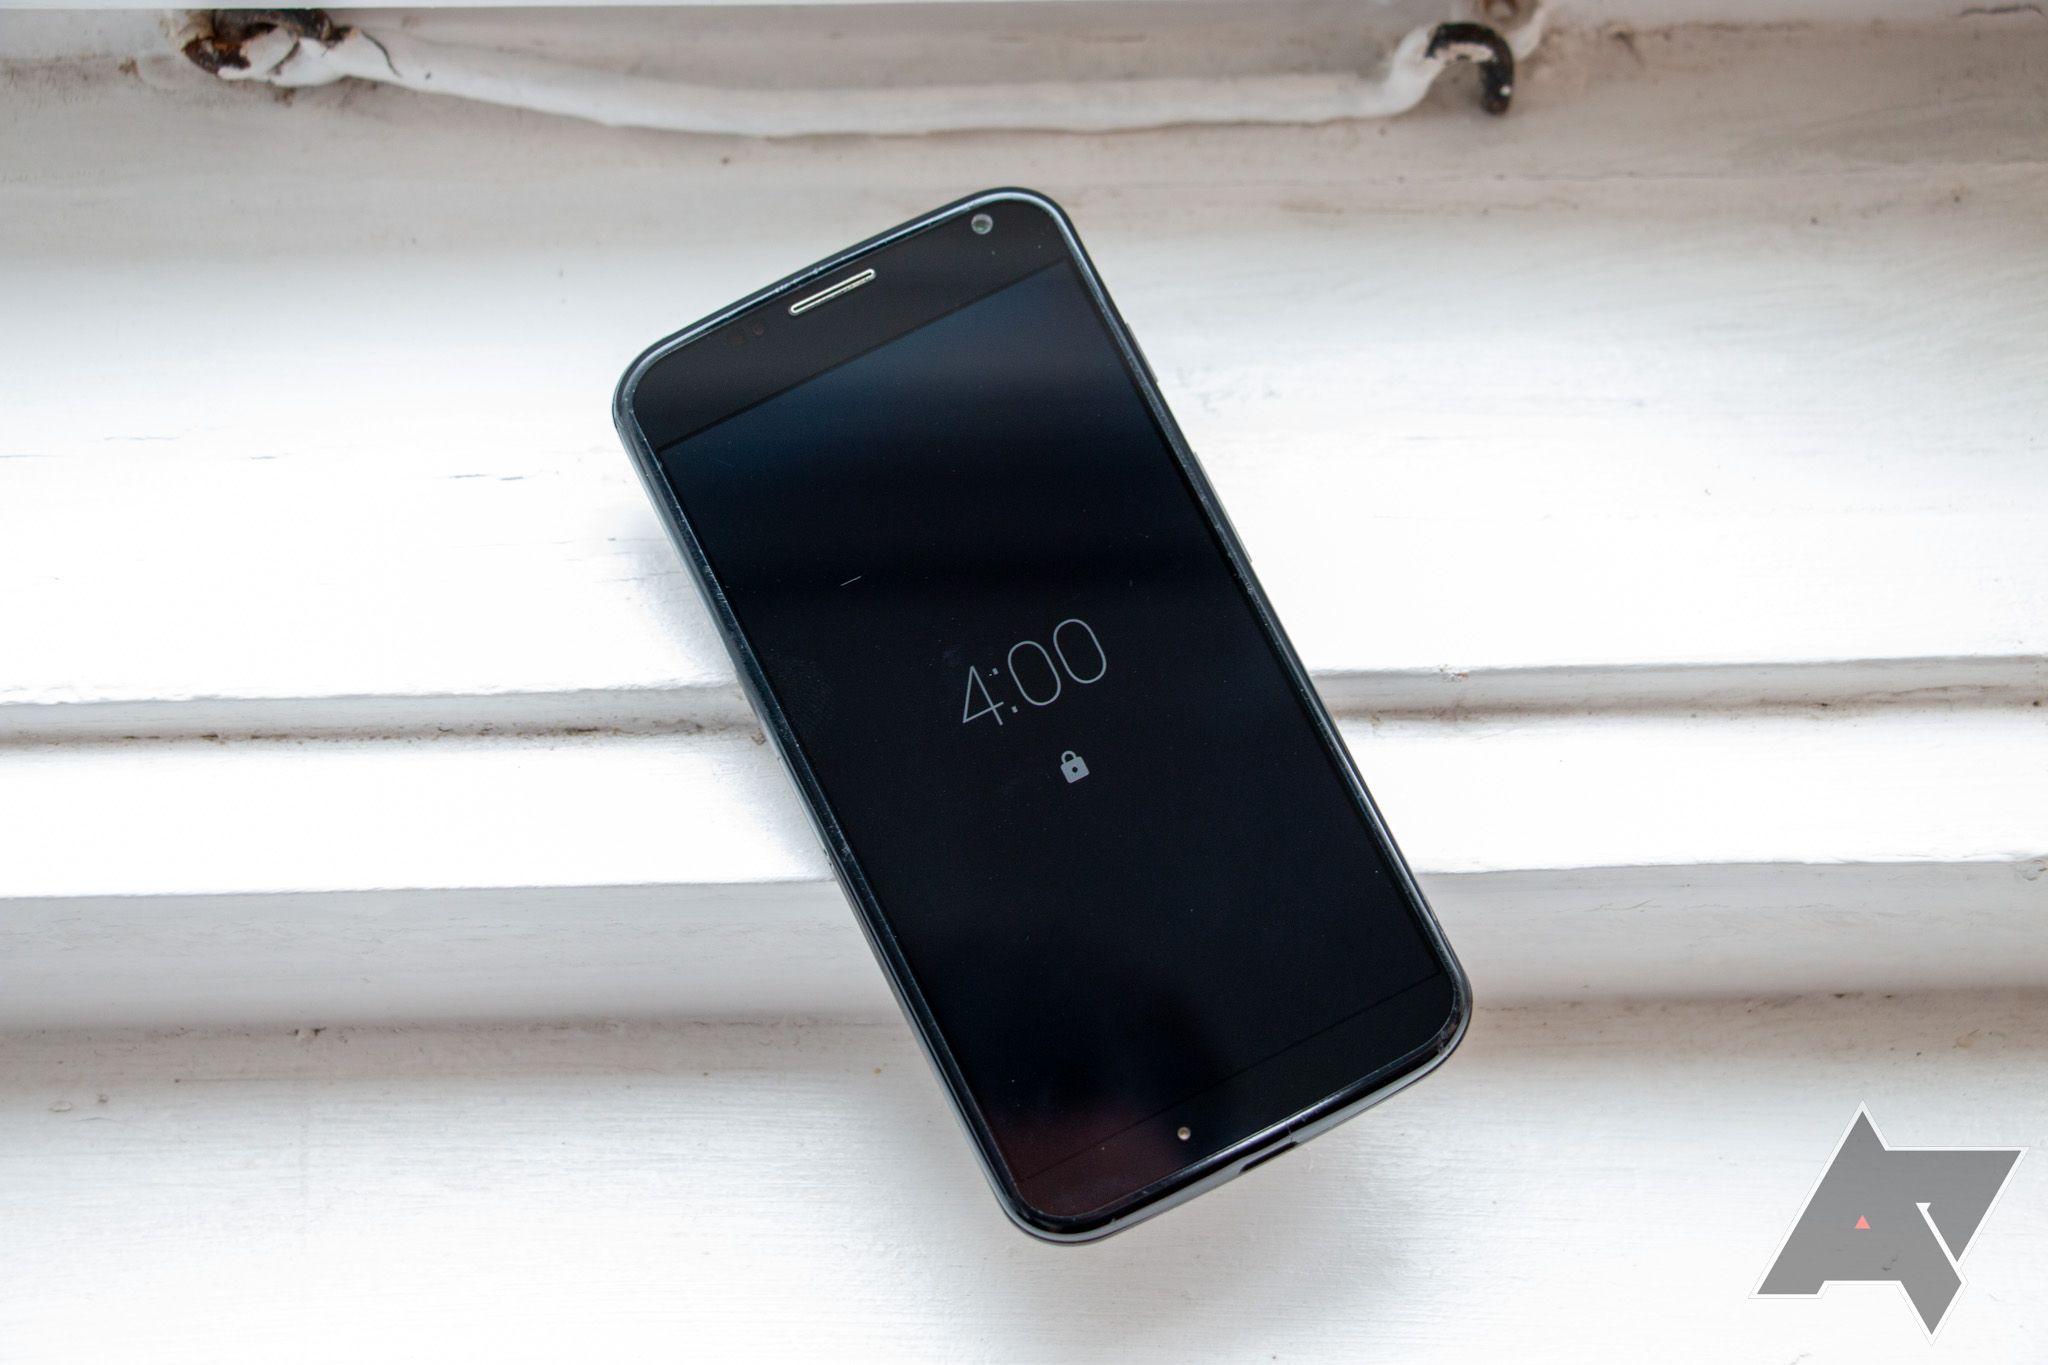 Moto X 2013 at 10: The first Google Pixel in all but name